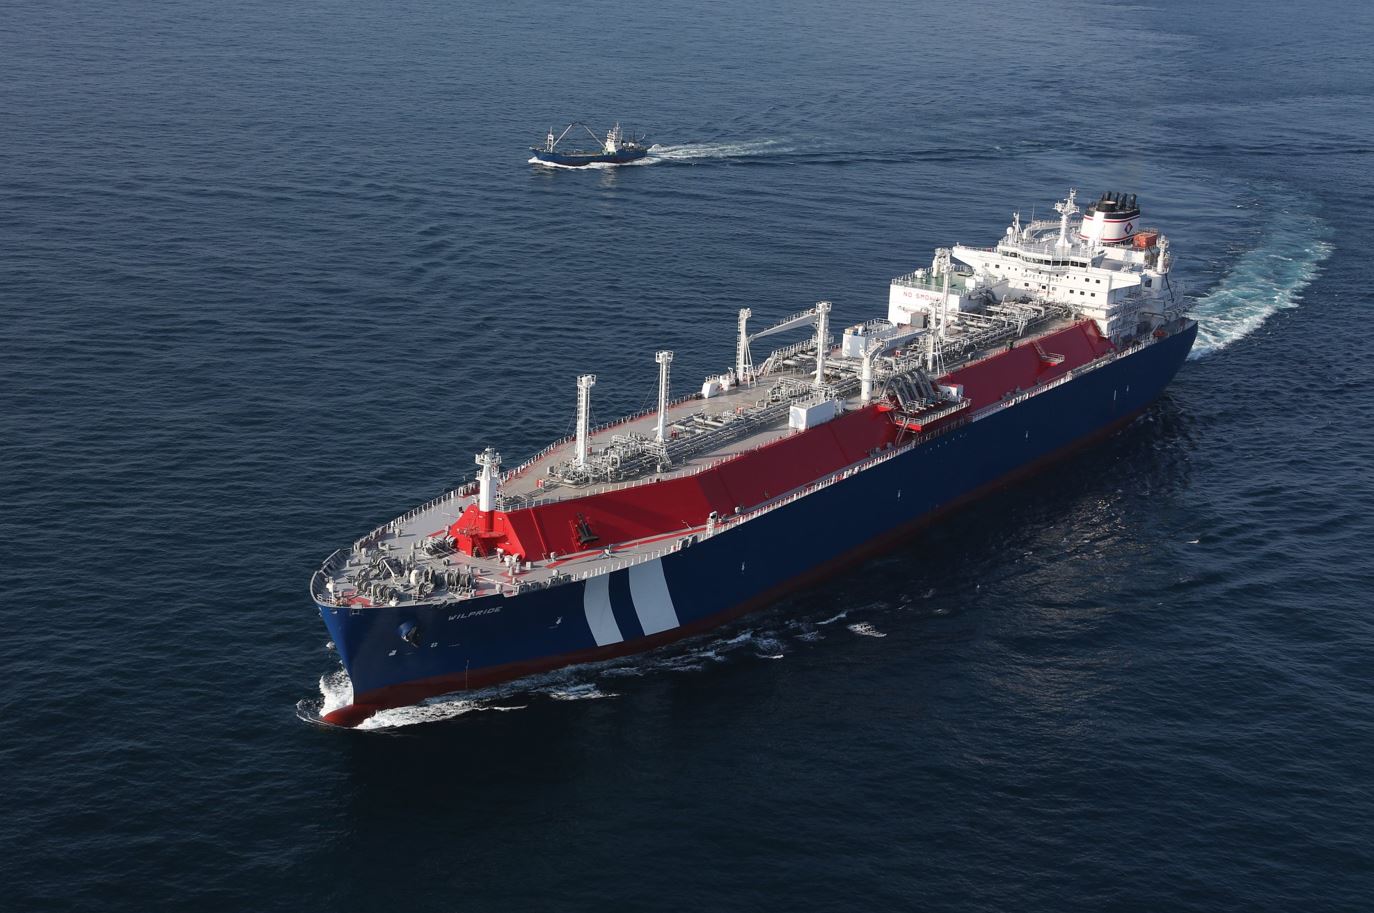 Awilco LNG's profit climbs in Q3